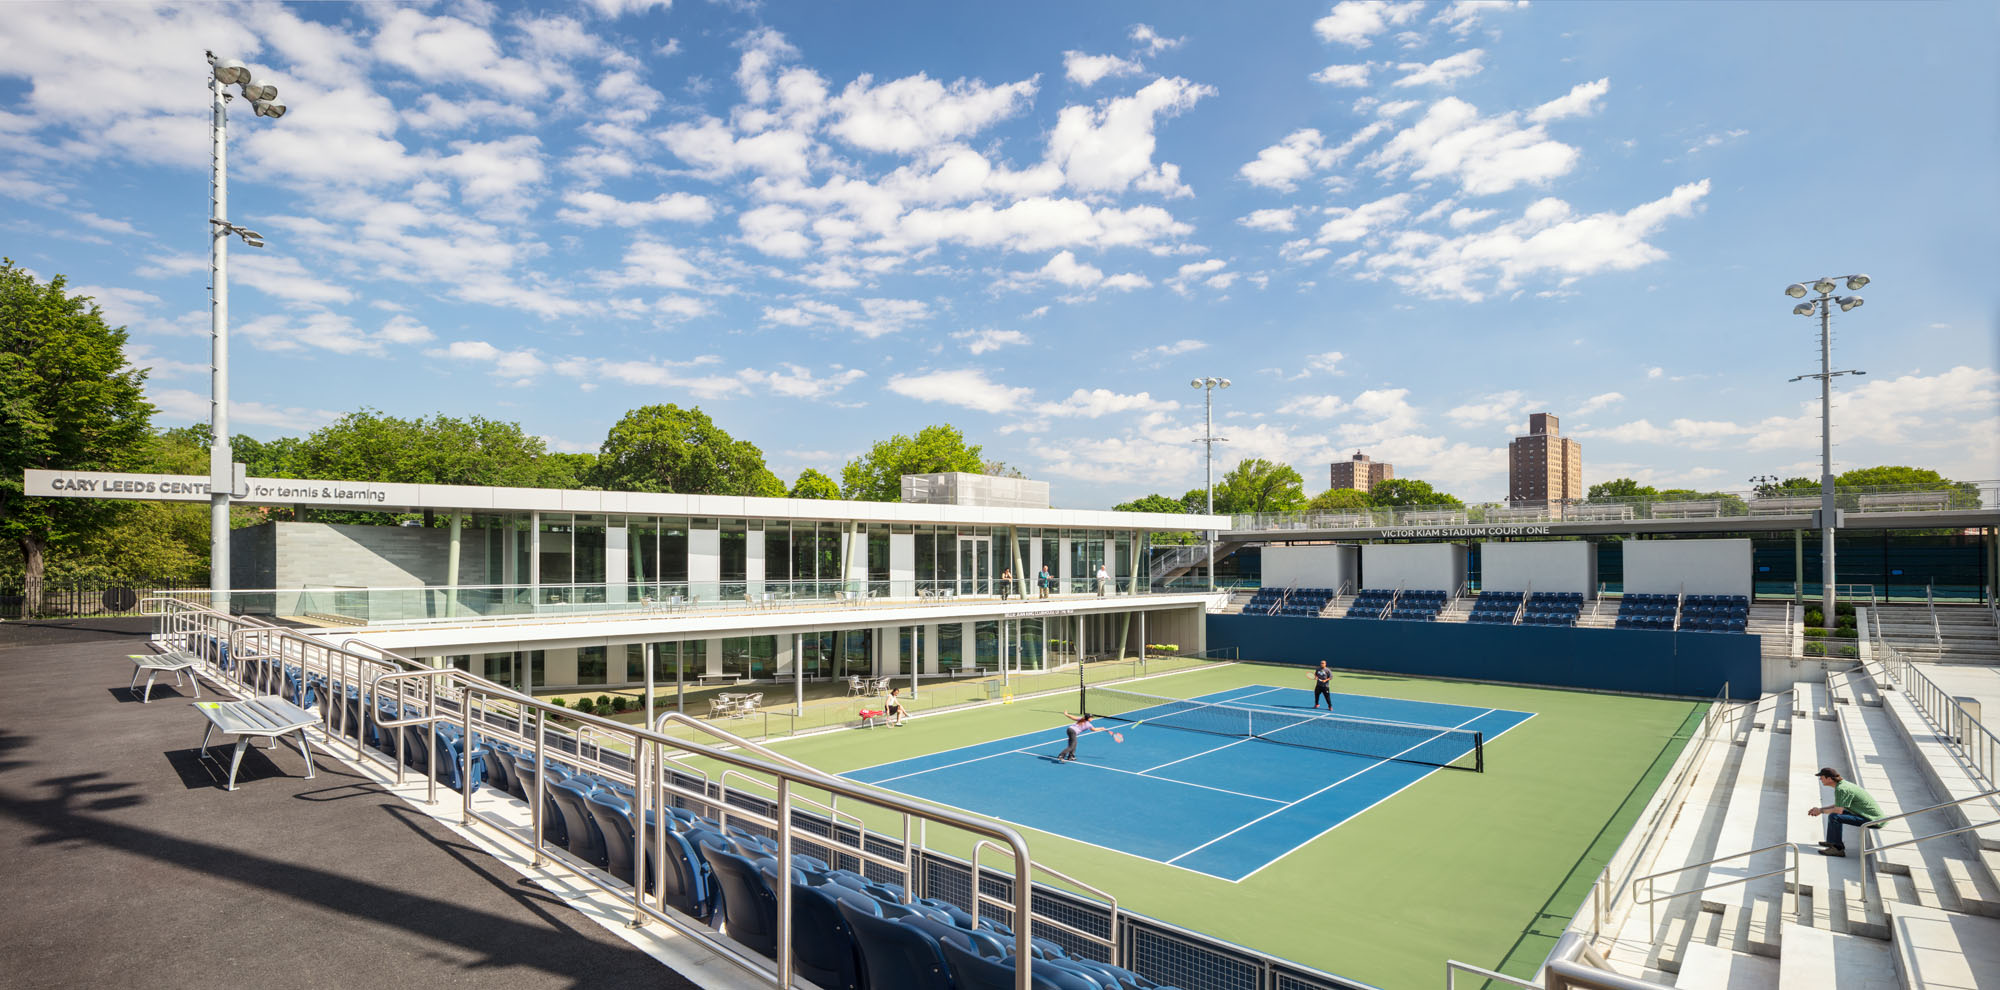 A photograph of a tennis stadium designed by Gluck + for NYJTL